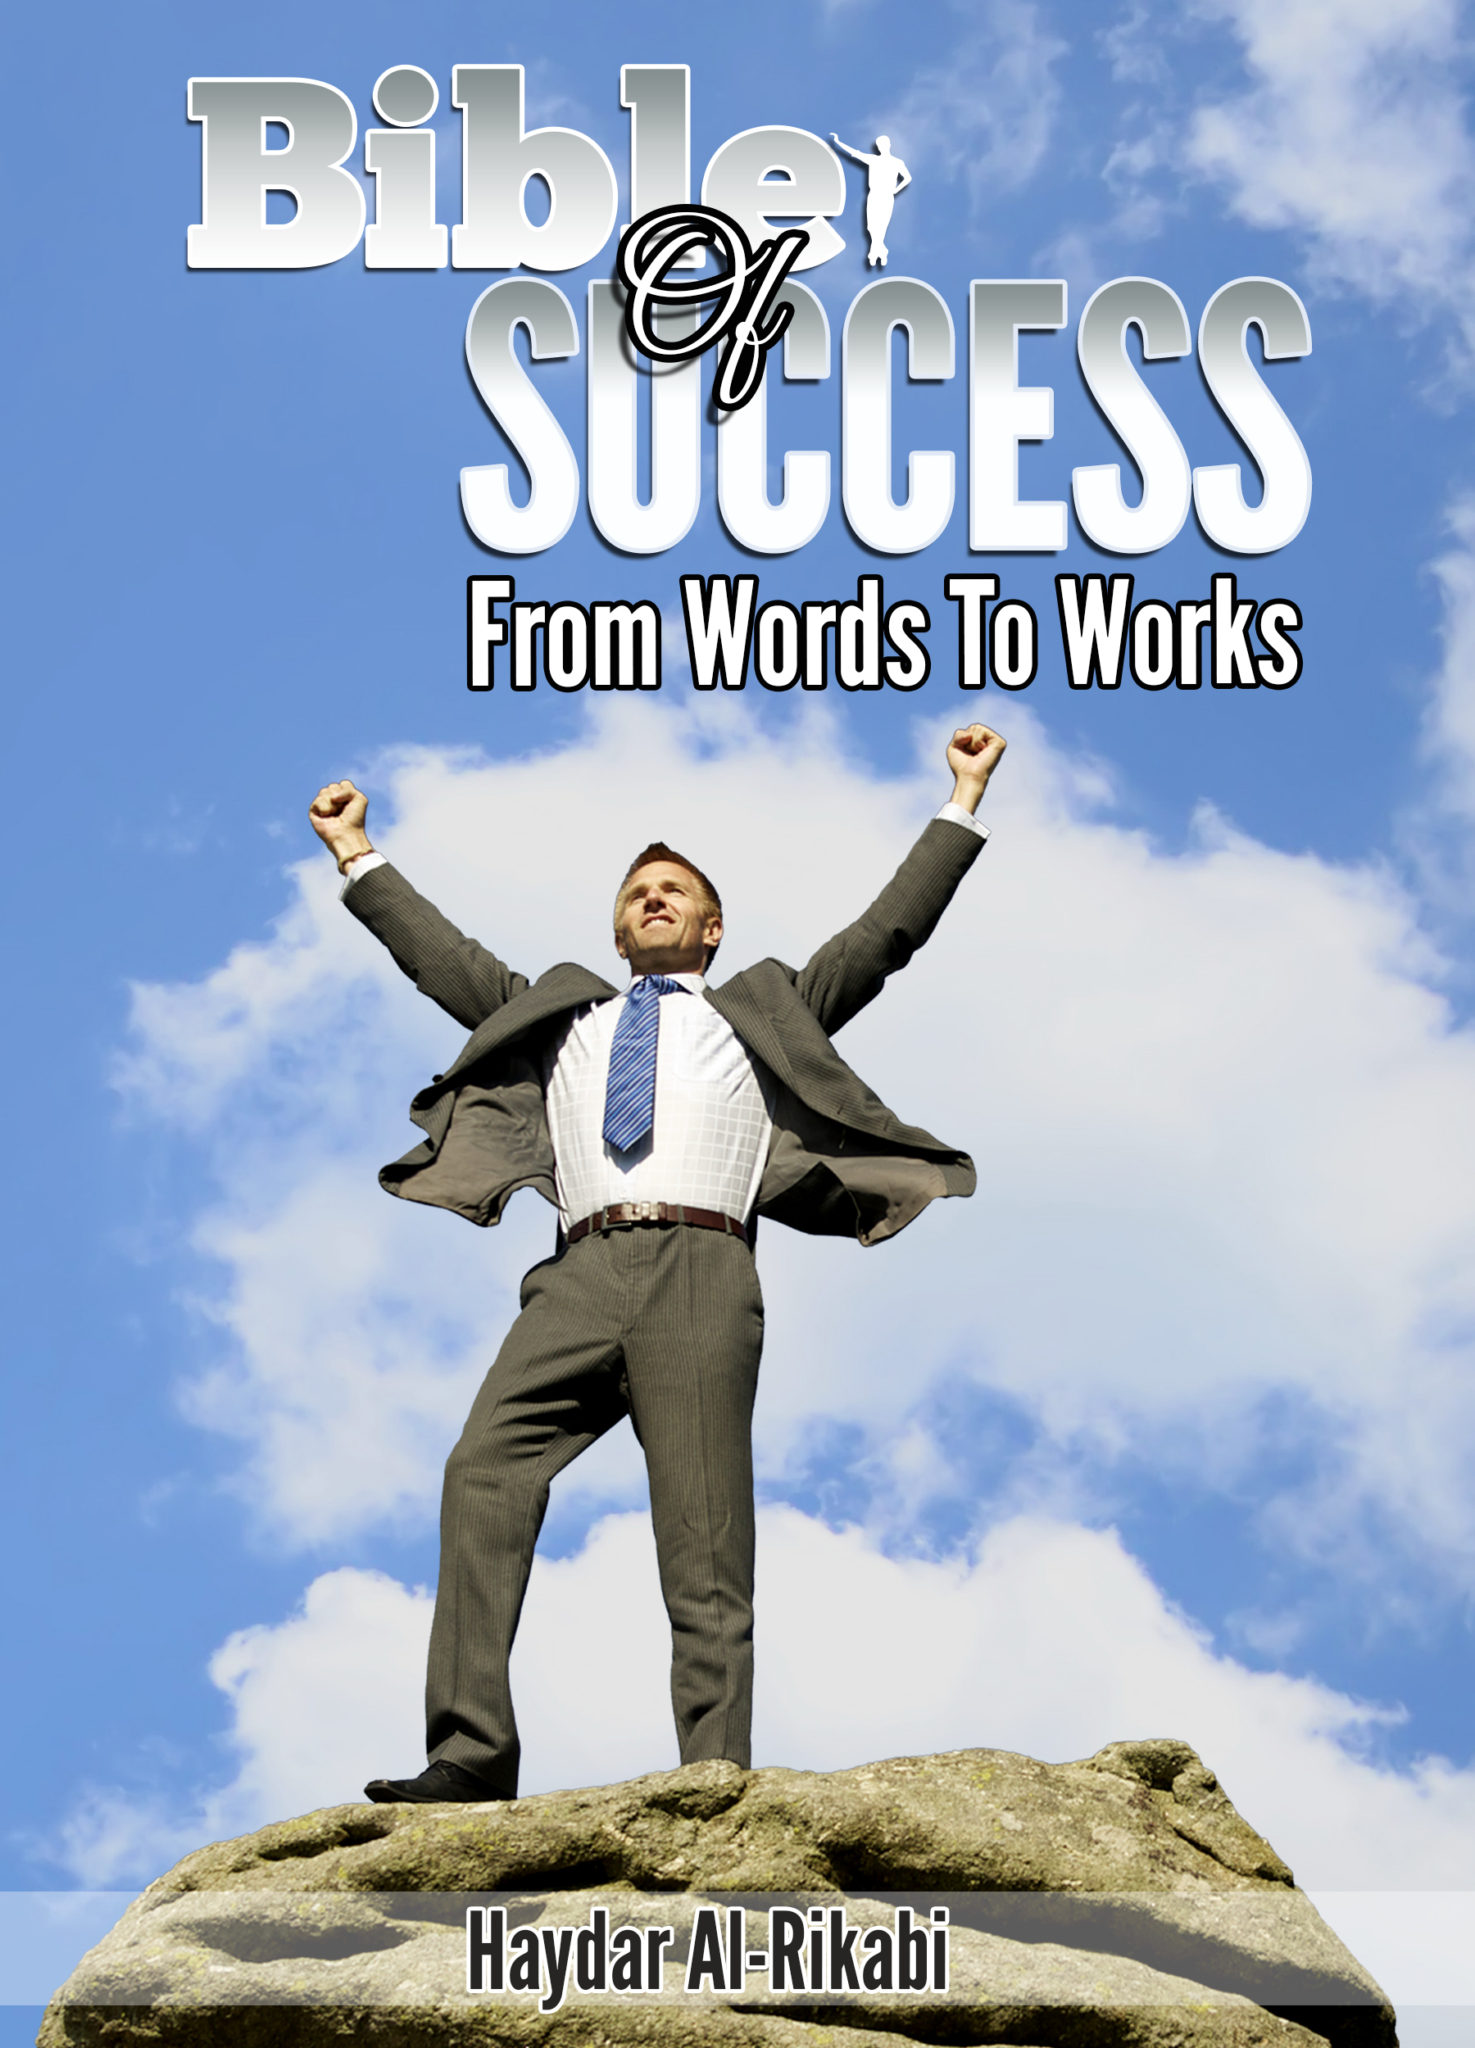 FREE: Bible of Success, From Words to Works by Haydar Al-Rikabi